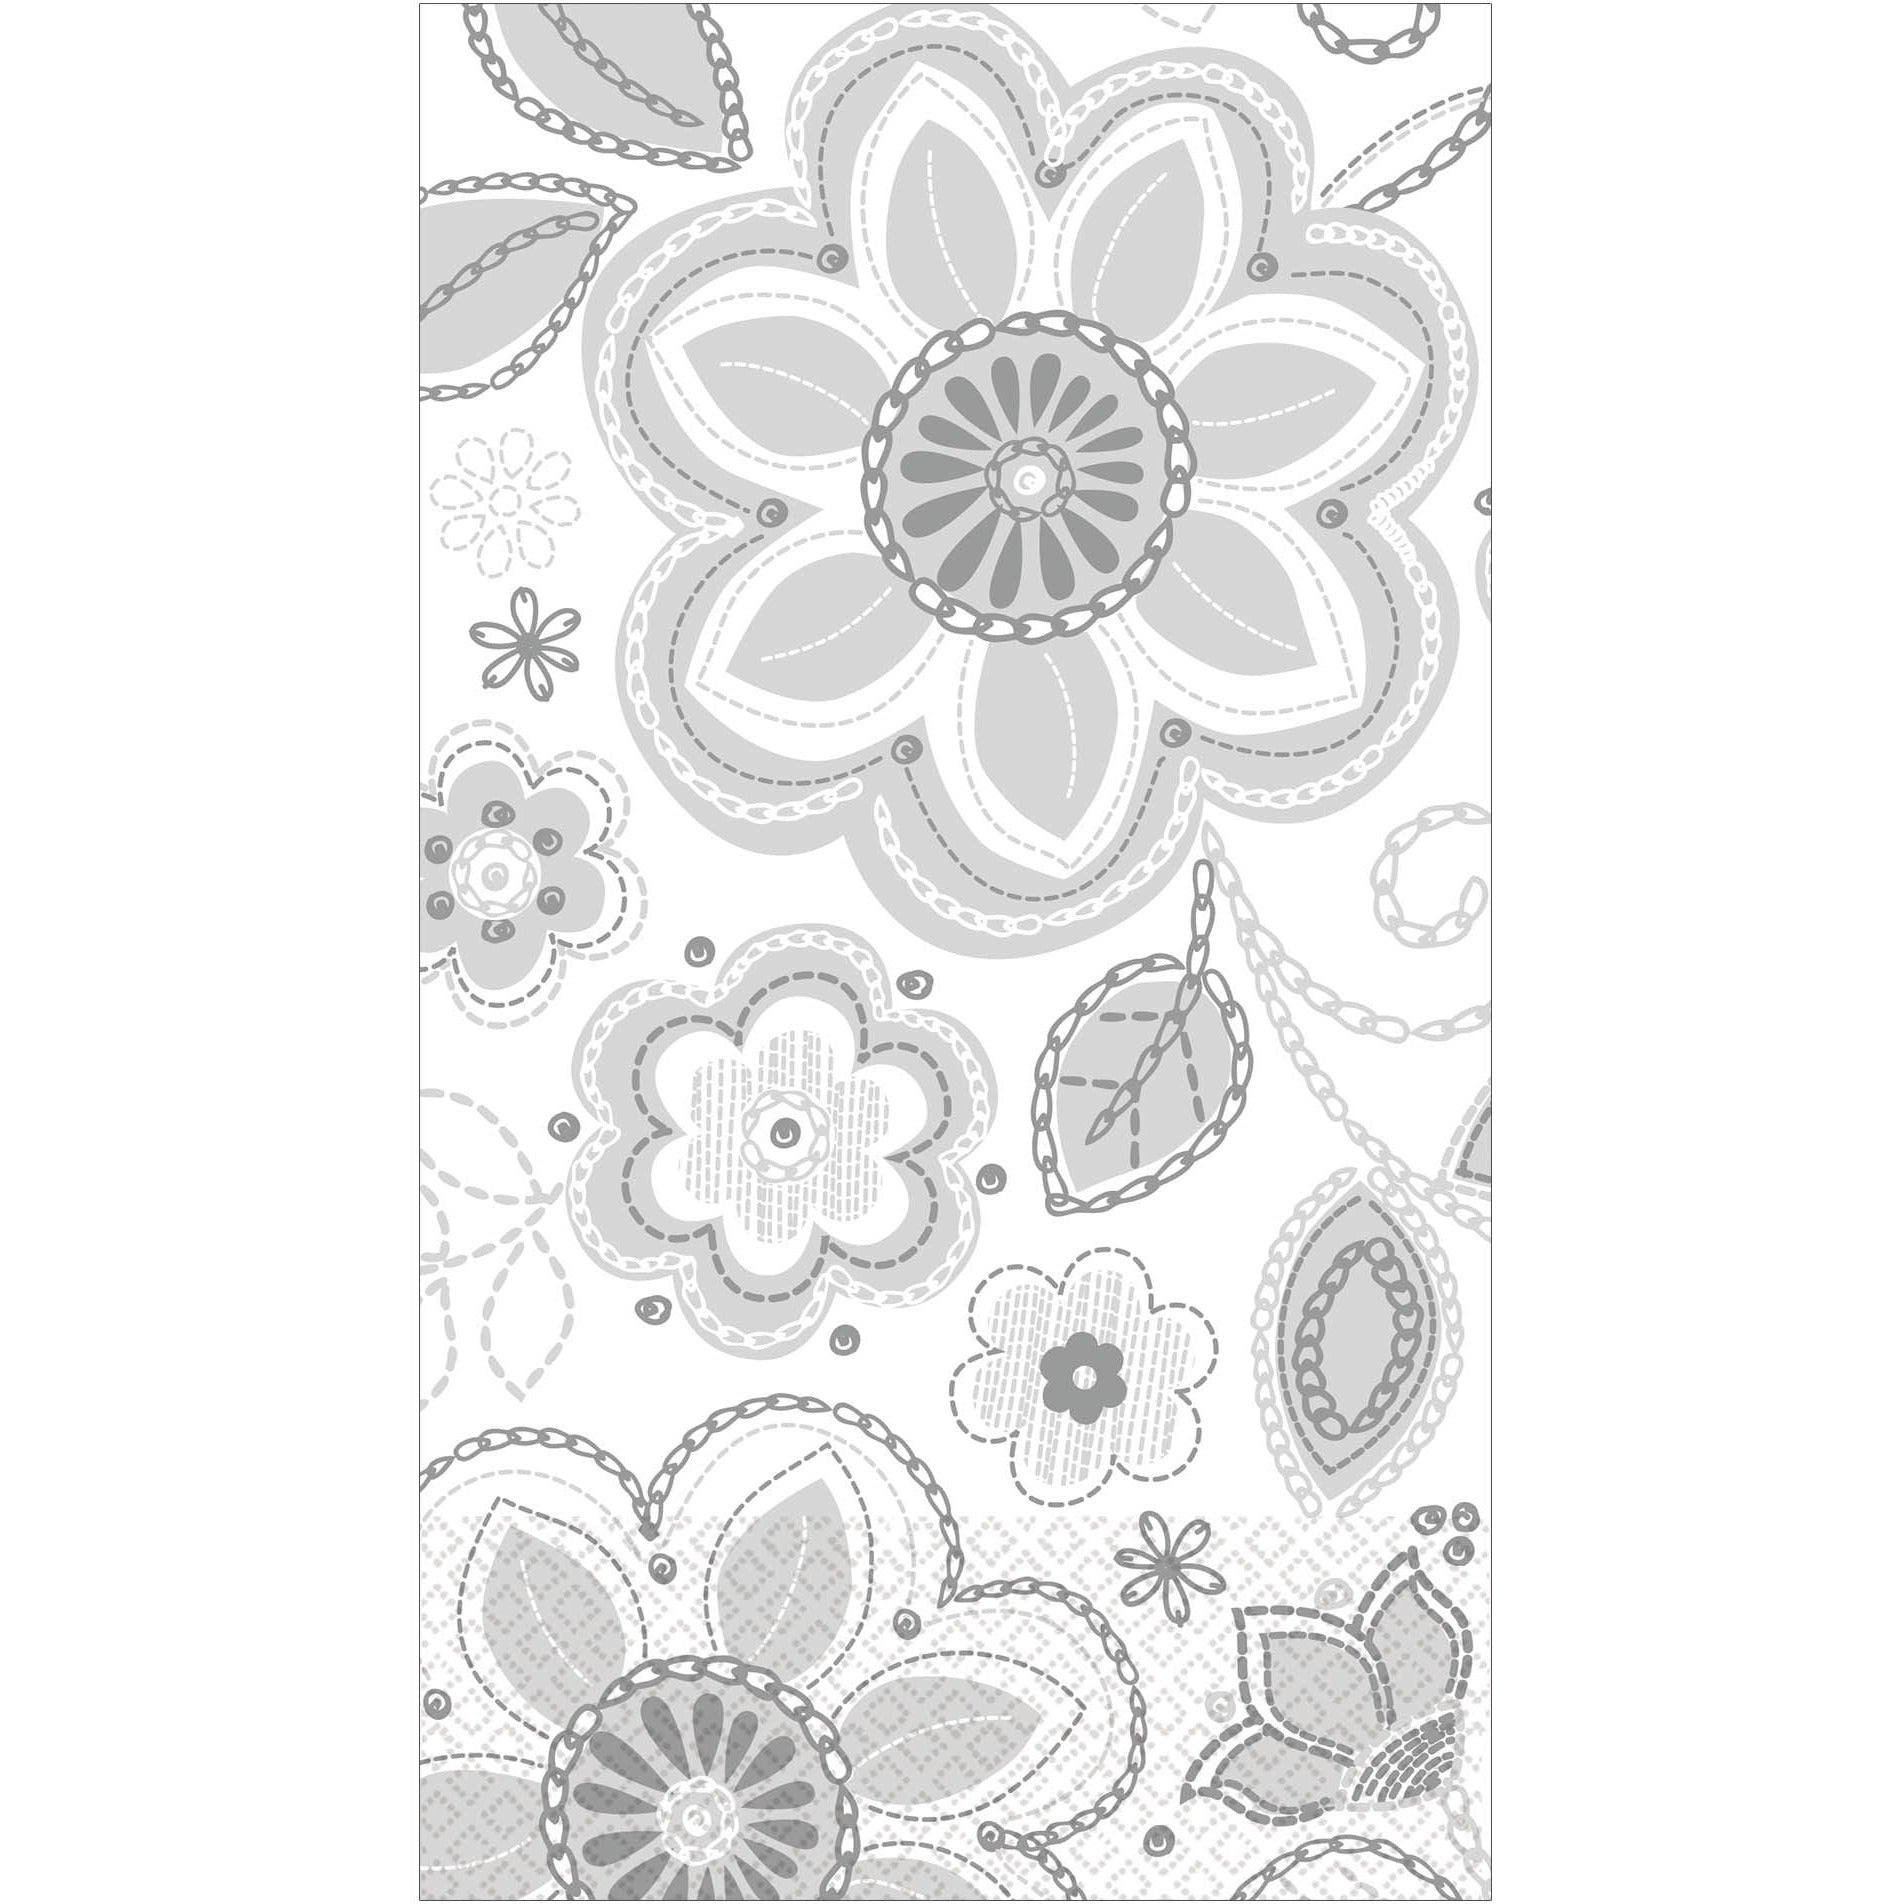 Amscan BOUTIQUE NAPKINS Silver Flower Embroidery Guest Towels 16ct